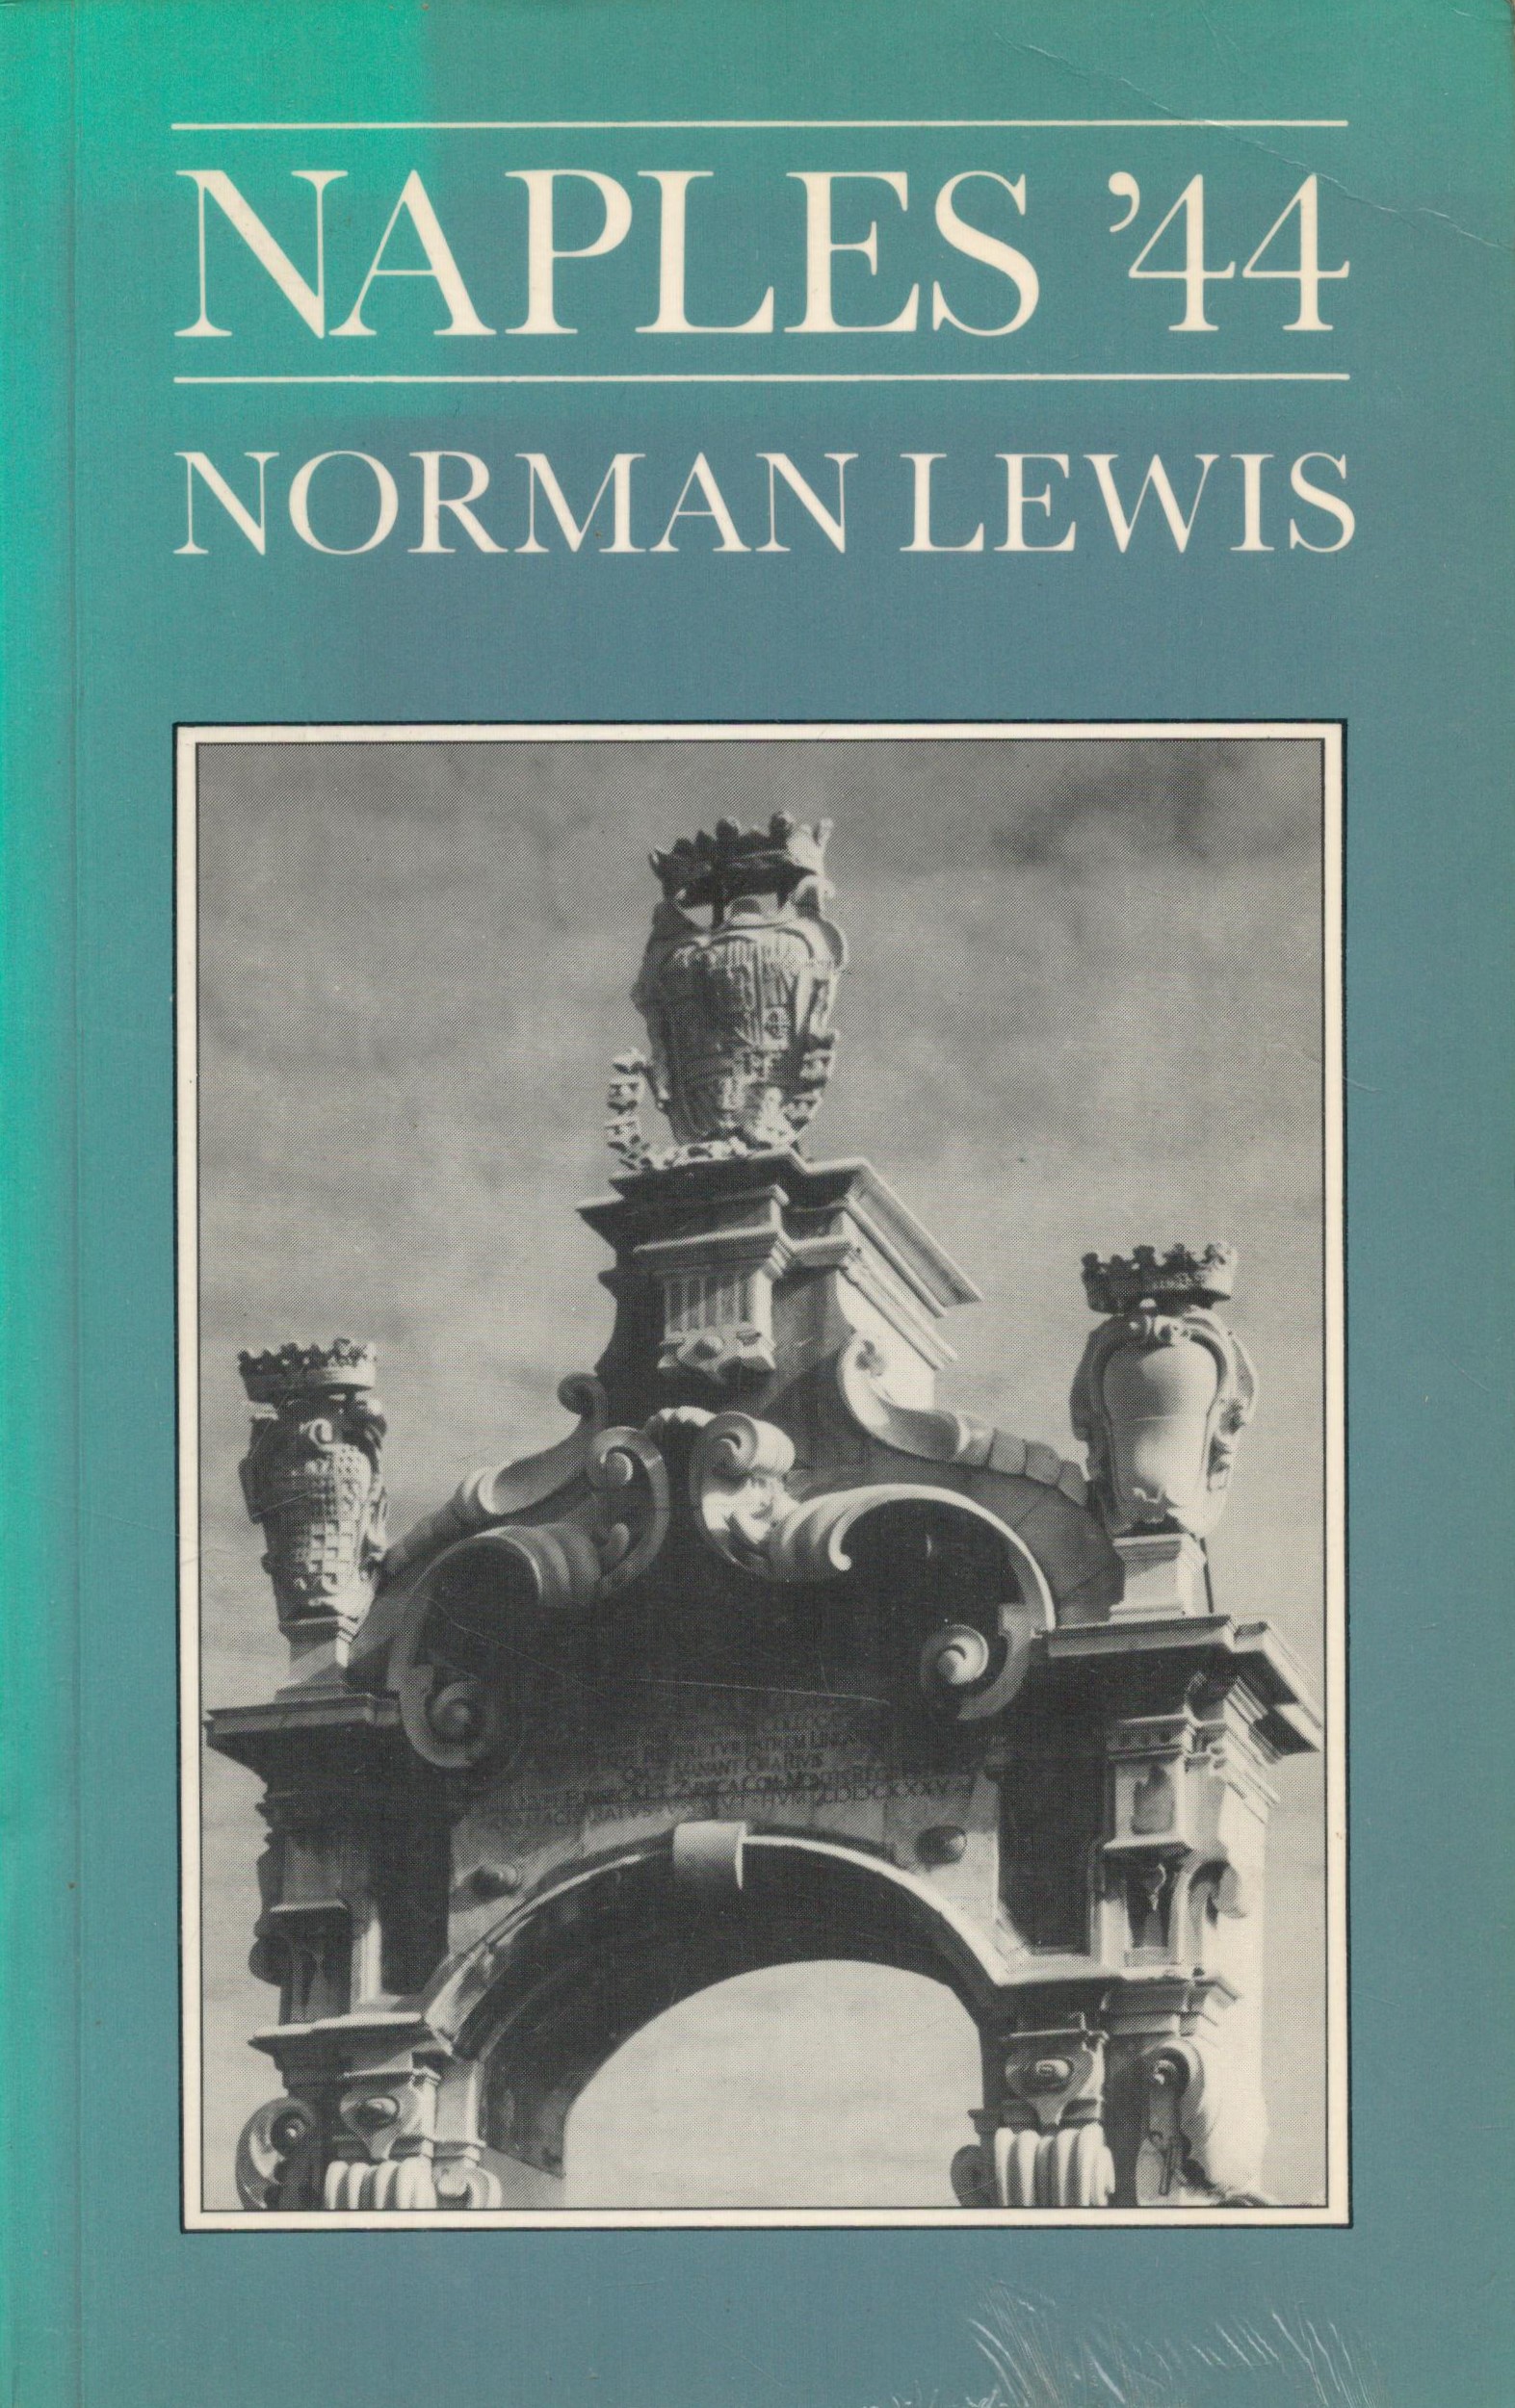 Naples '44 by Norman Lewis 1983 First Edition Softback Book with 206 pages published by Eland